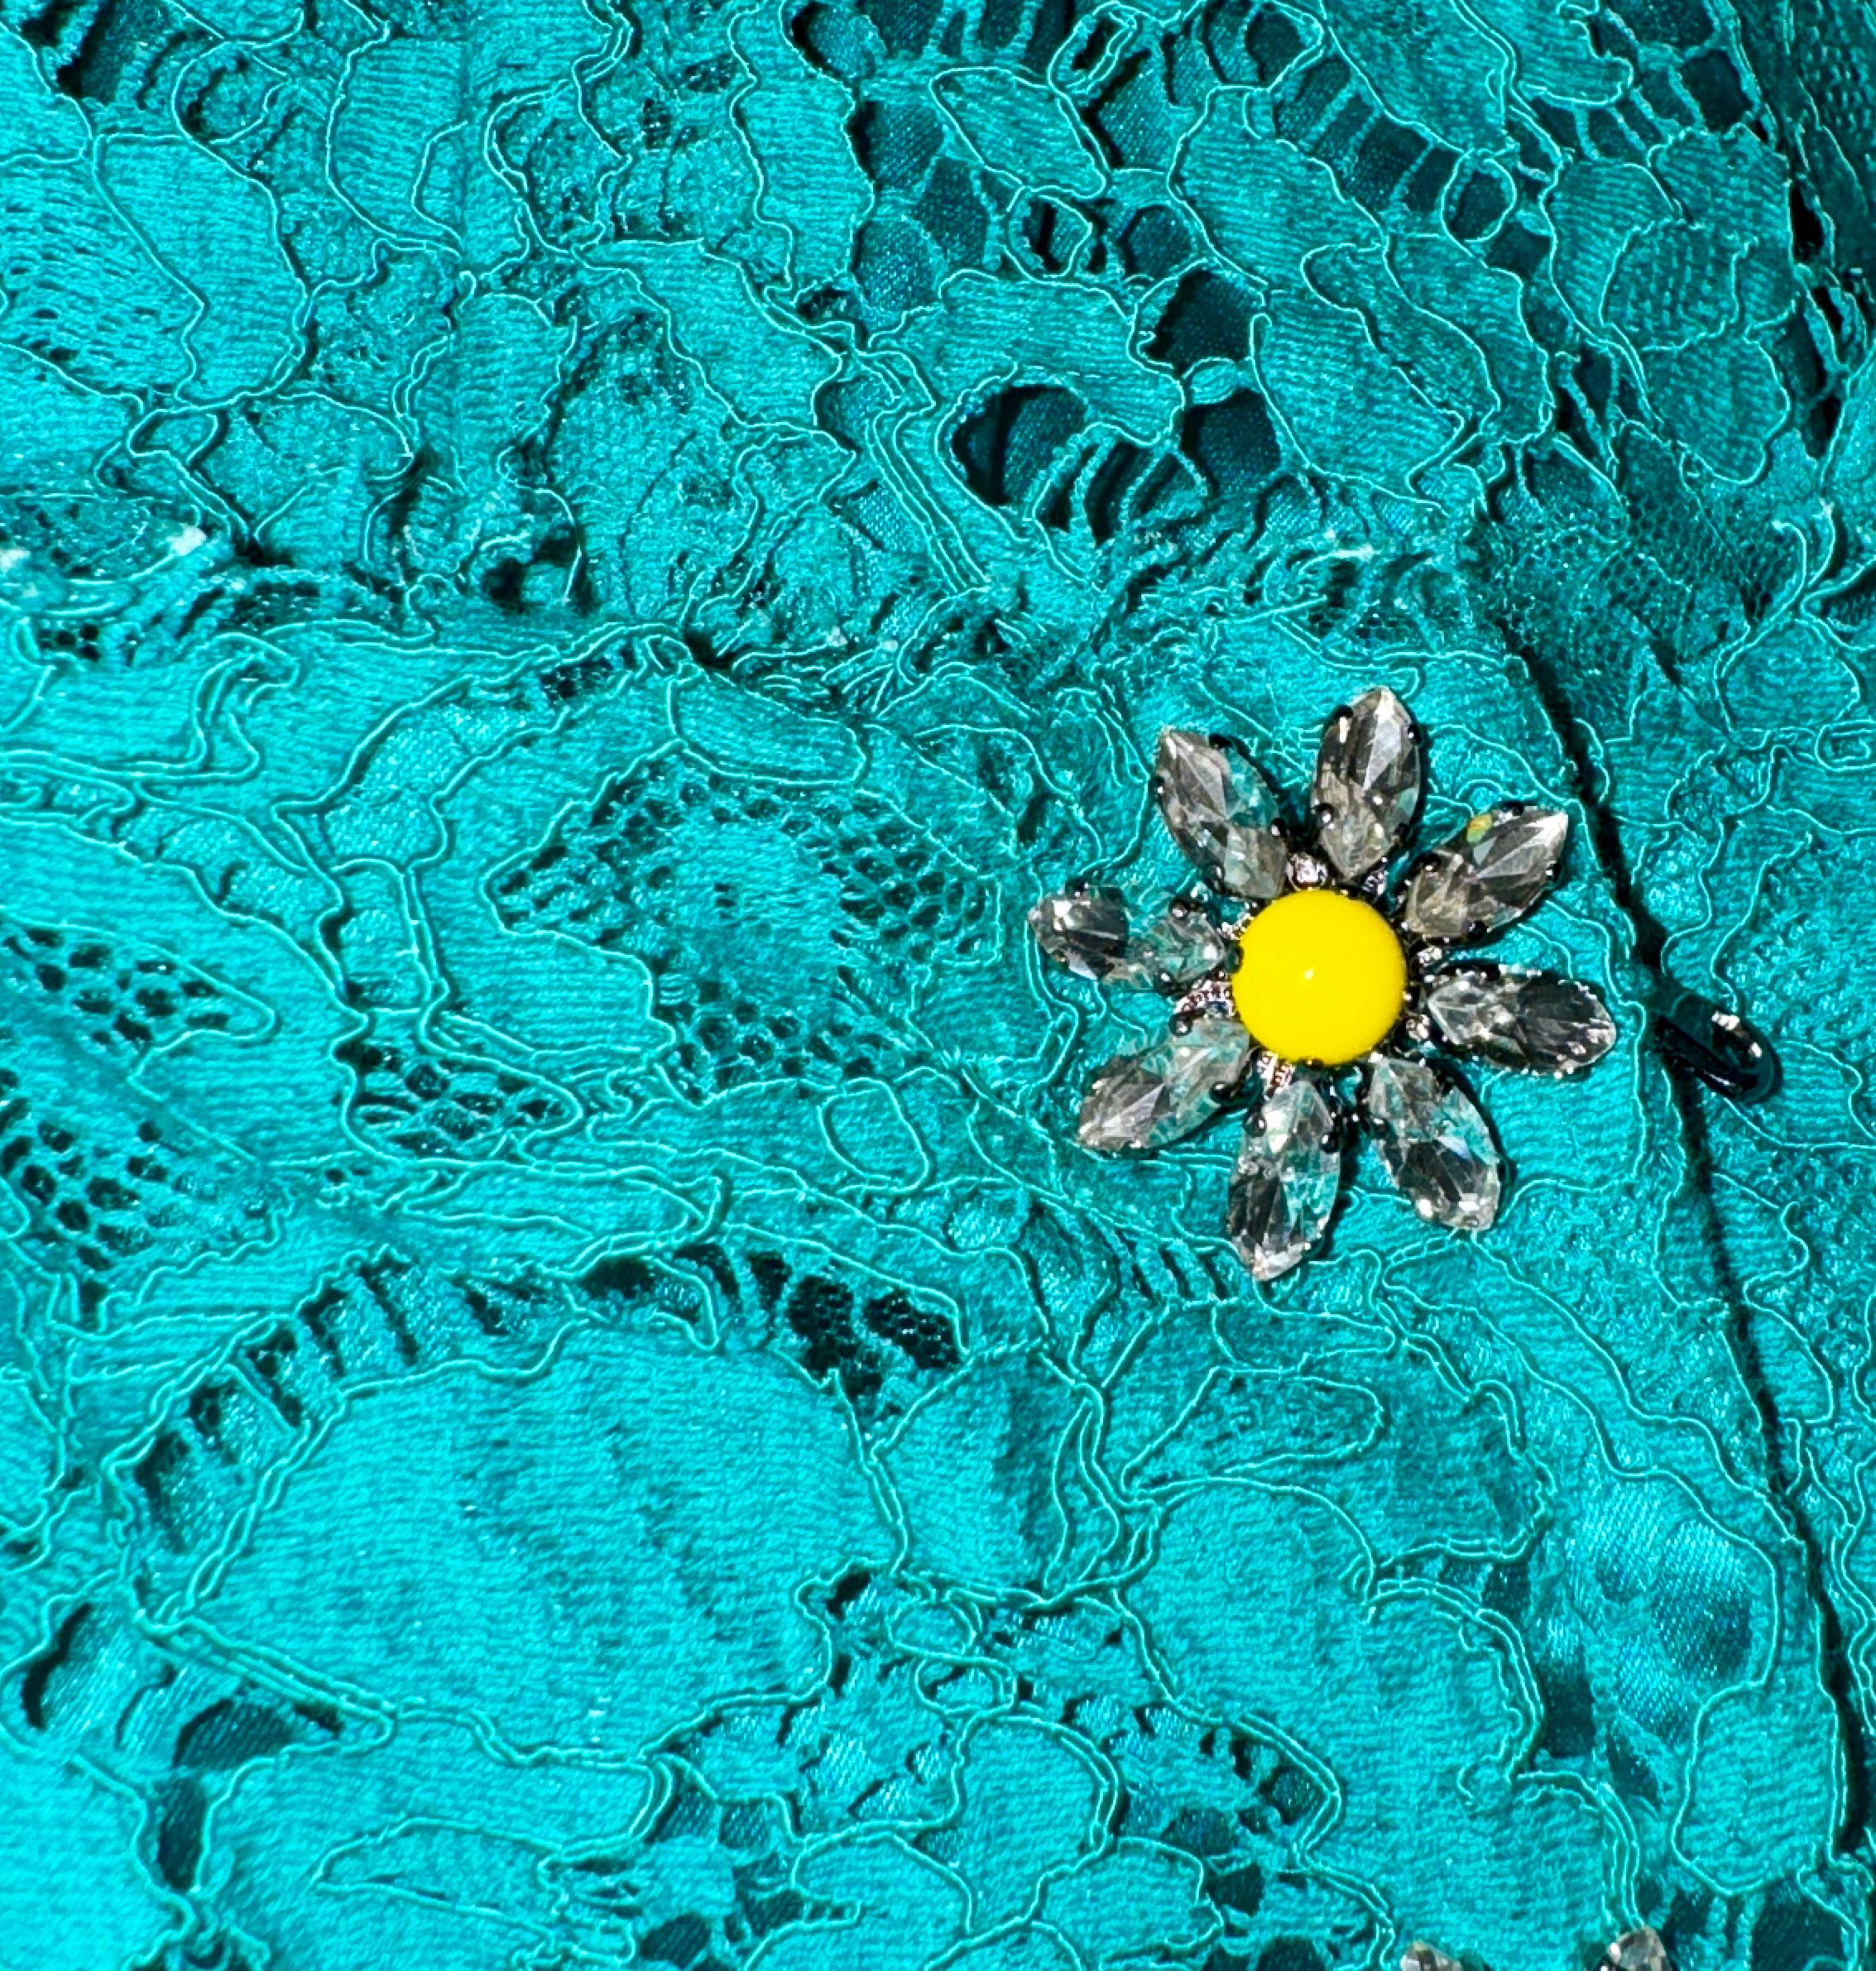 NEW Dolce & Gabbana Turquoise Aqua Lace Crystal Floral Buttons Shift Dress 40 For Sale 3